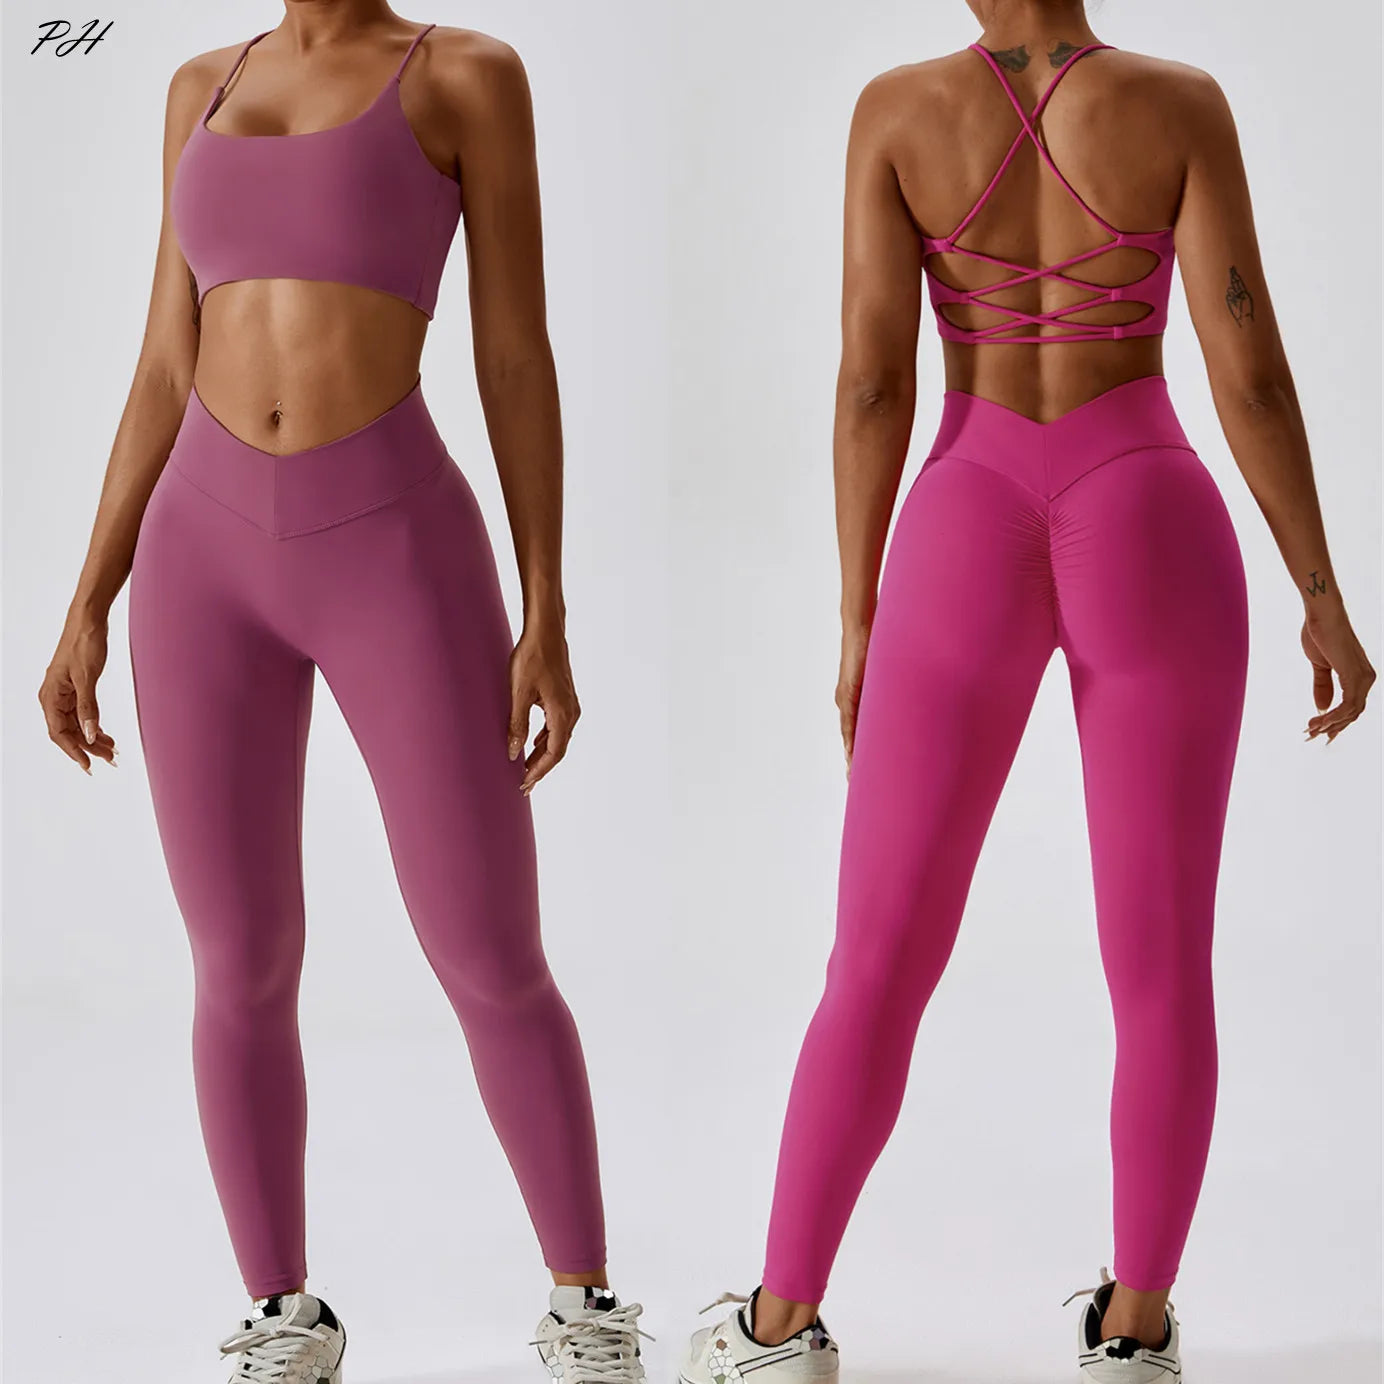 Upgrade Your Workout with Our Sexy Seamless Yoga Set - High Waist Leggings & Sports Bra Combo for Women